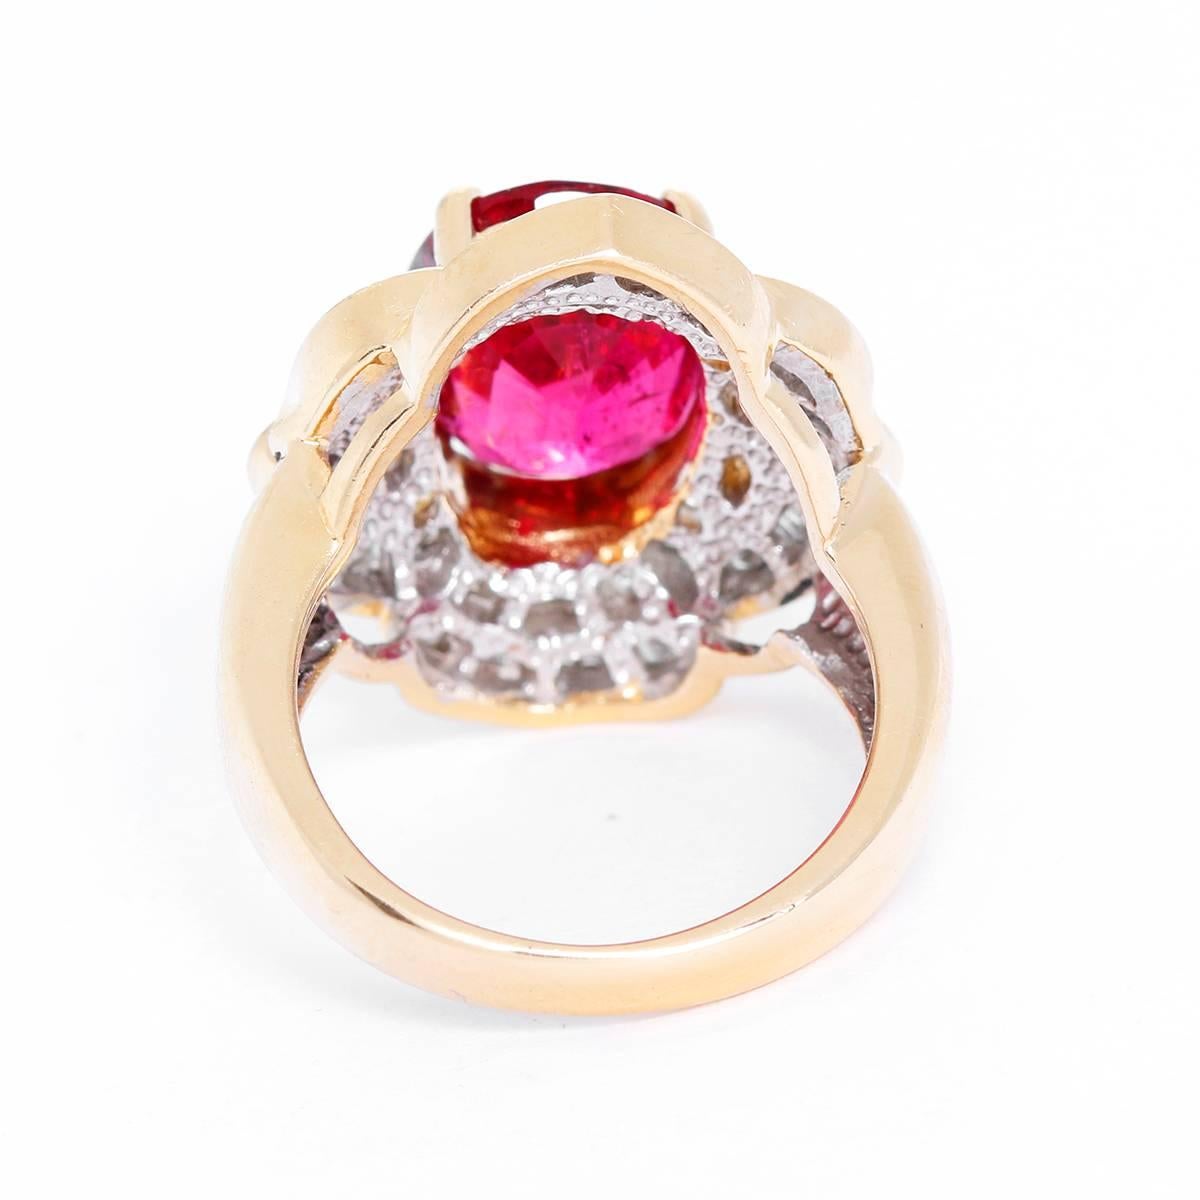 This stunning ring features central oval-cut rubellite tourmaline, with apx. 5.12 cts., surrounded by six round brilliant-cut and sixty-six baguette-cut diamonds, with apx. 0.79 cts. Total weight is 11.0 grams. Size 7.